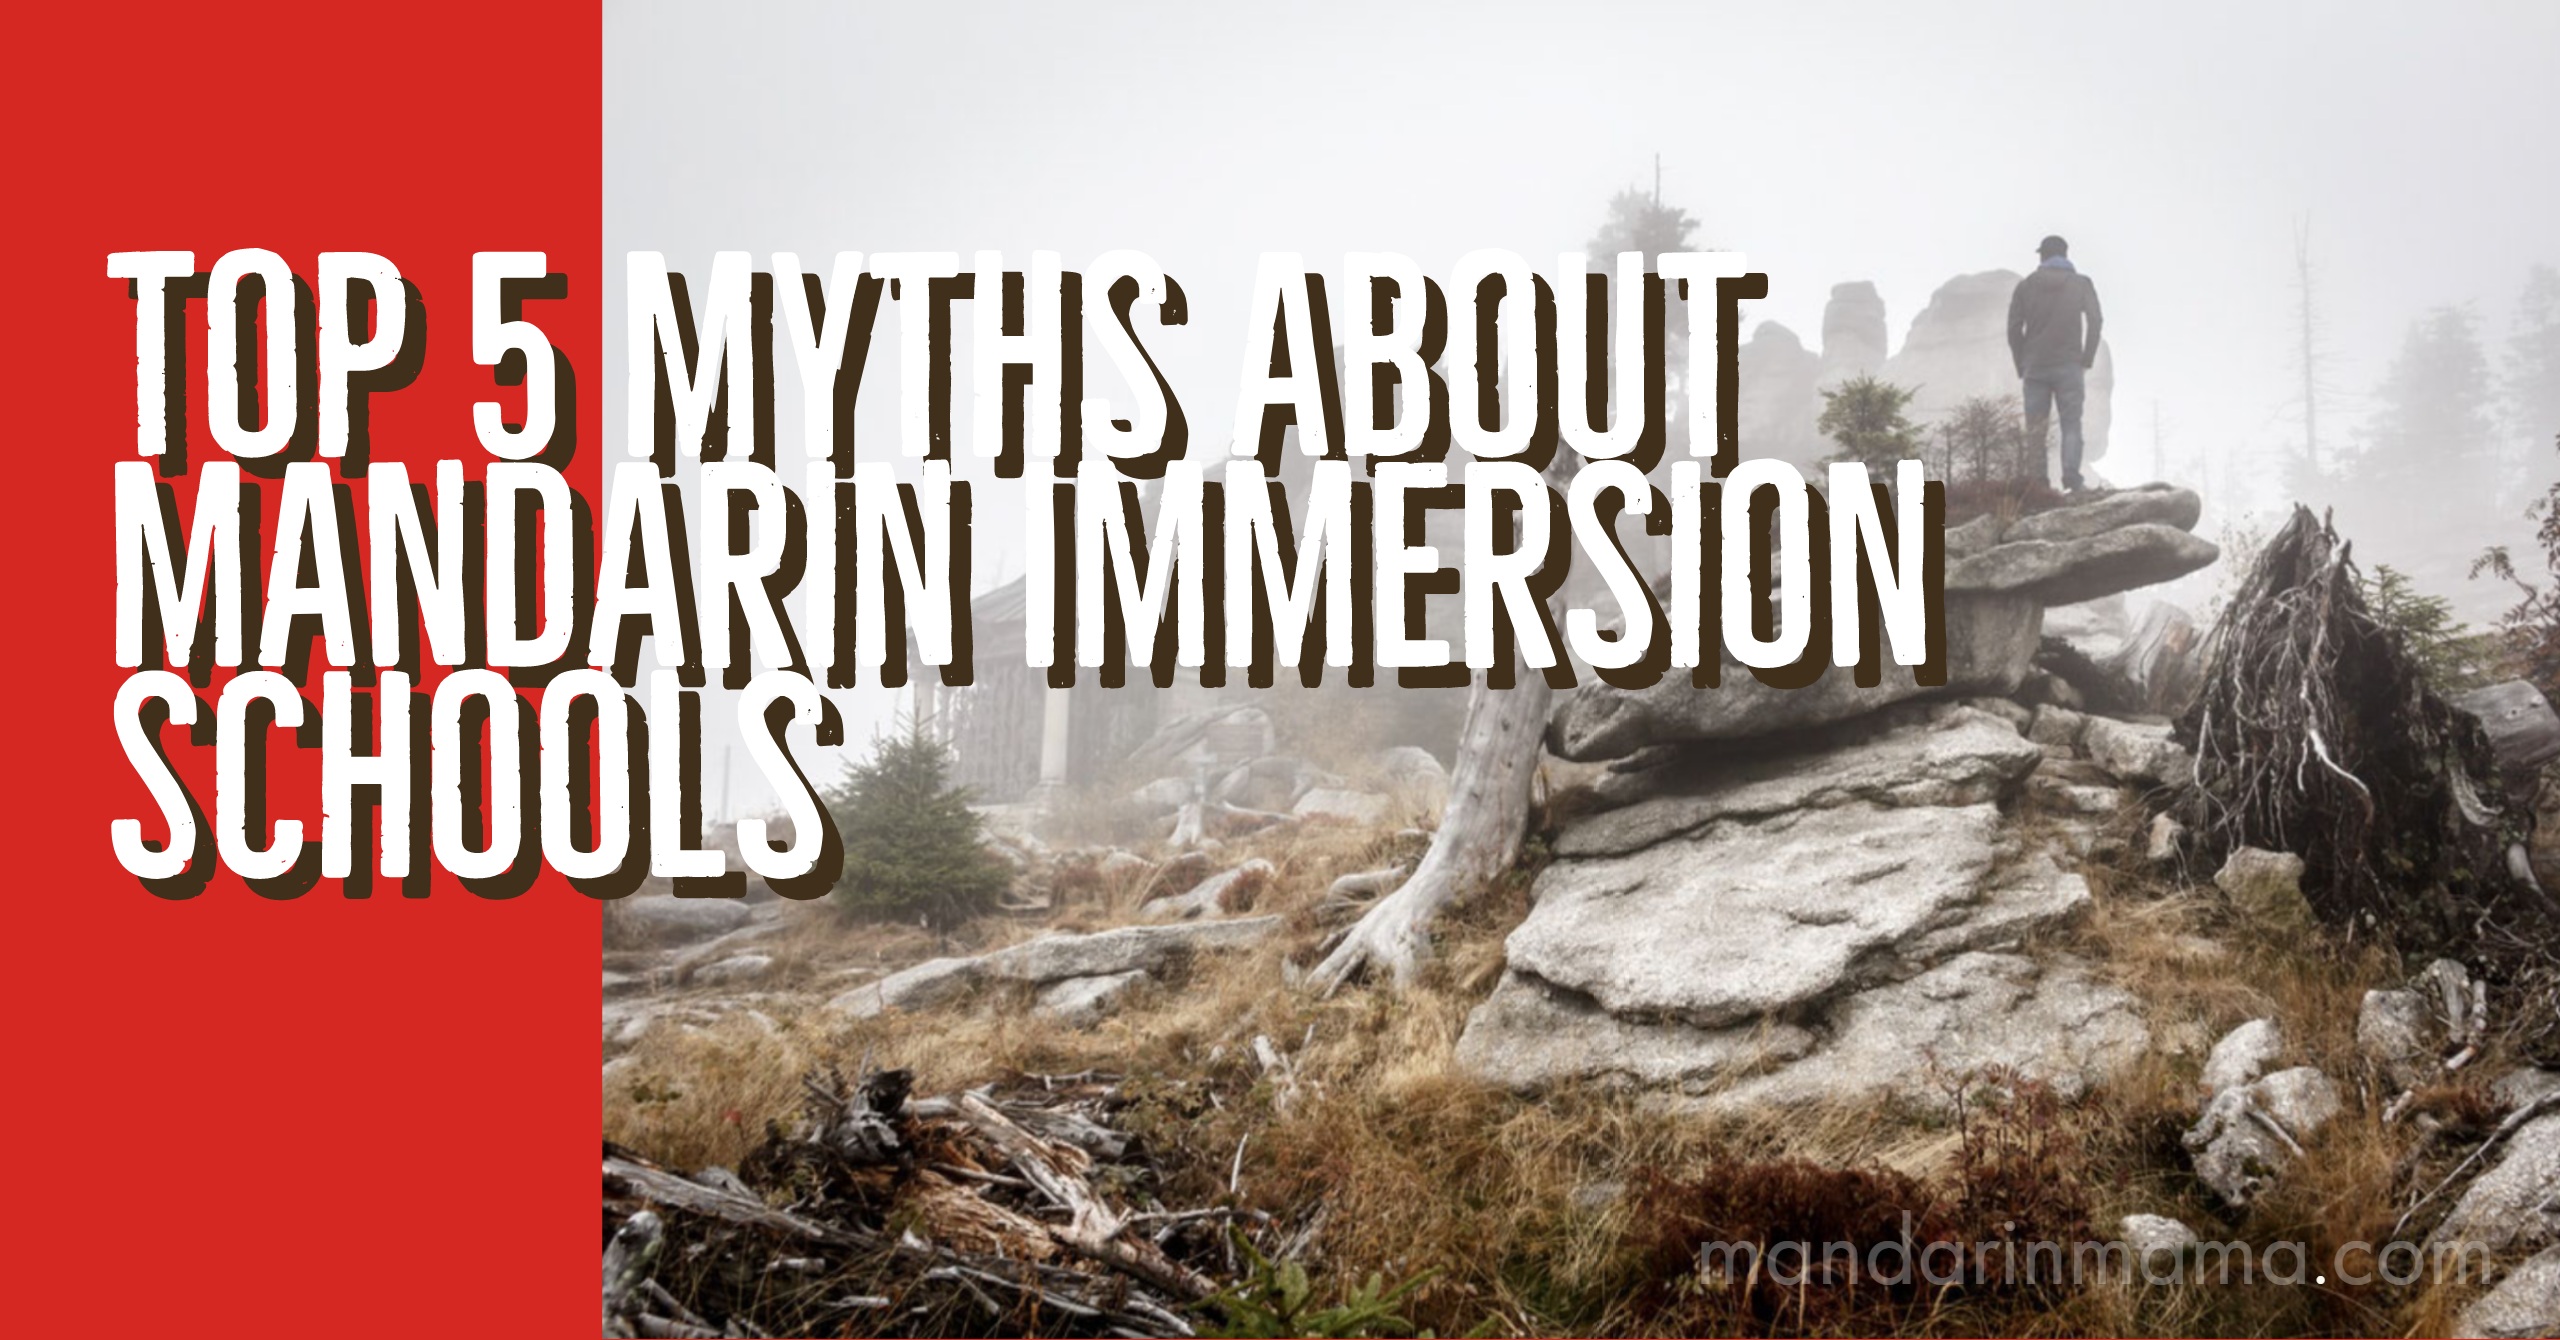 Top 5 Myths about Mandarin Immersion Schools